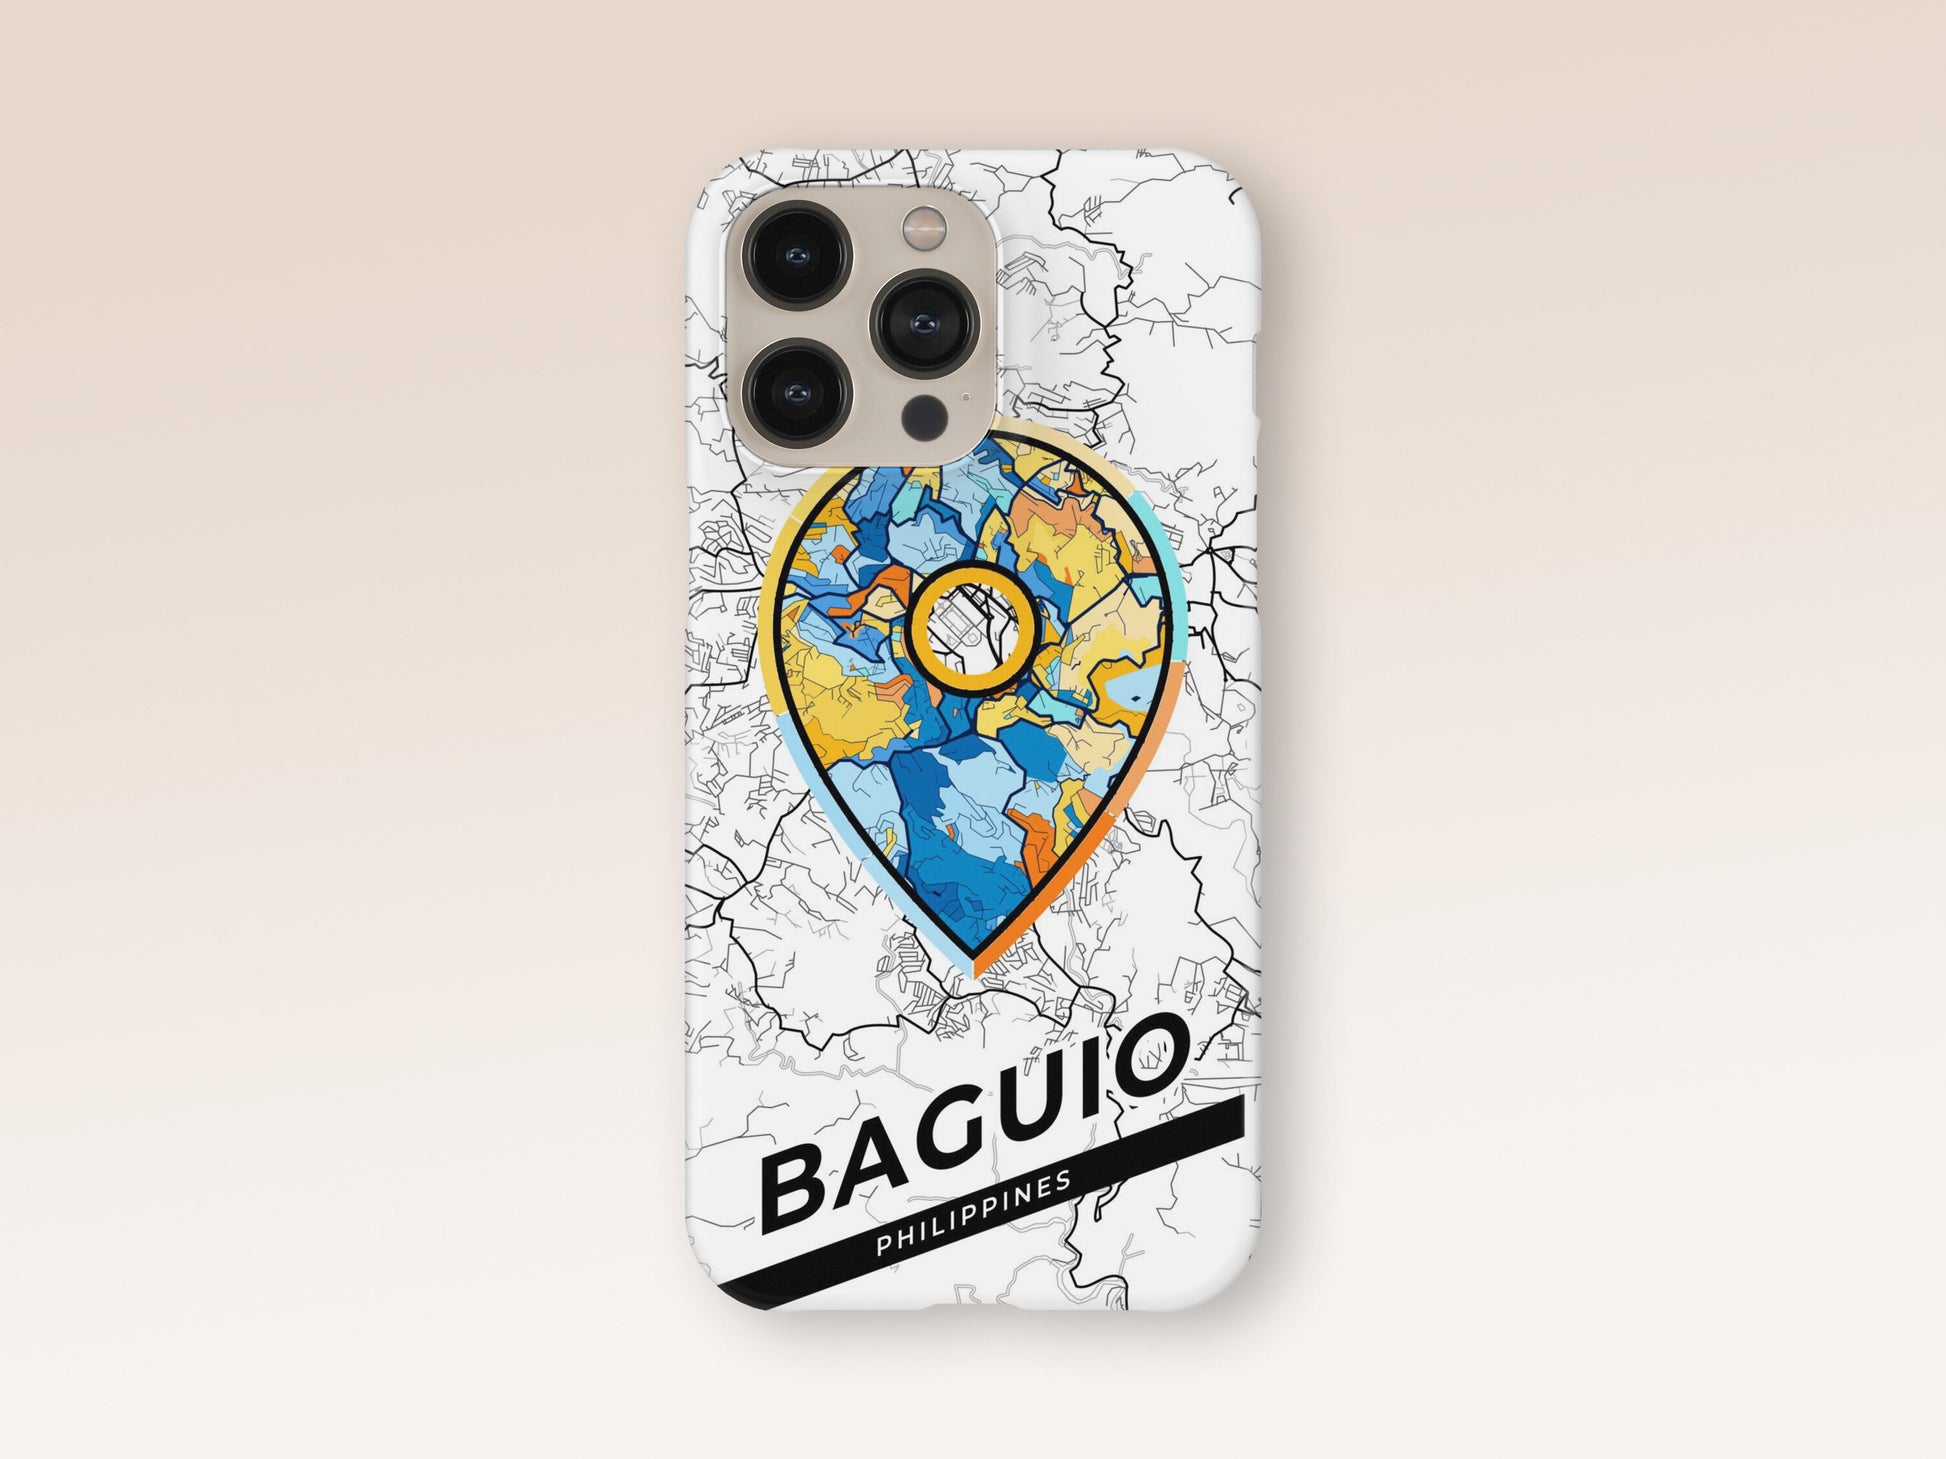 Baguio Philippines slim phone case with colorful icon. Birthday, wedding or housewarming gift. Couple match cases. 1